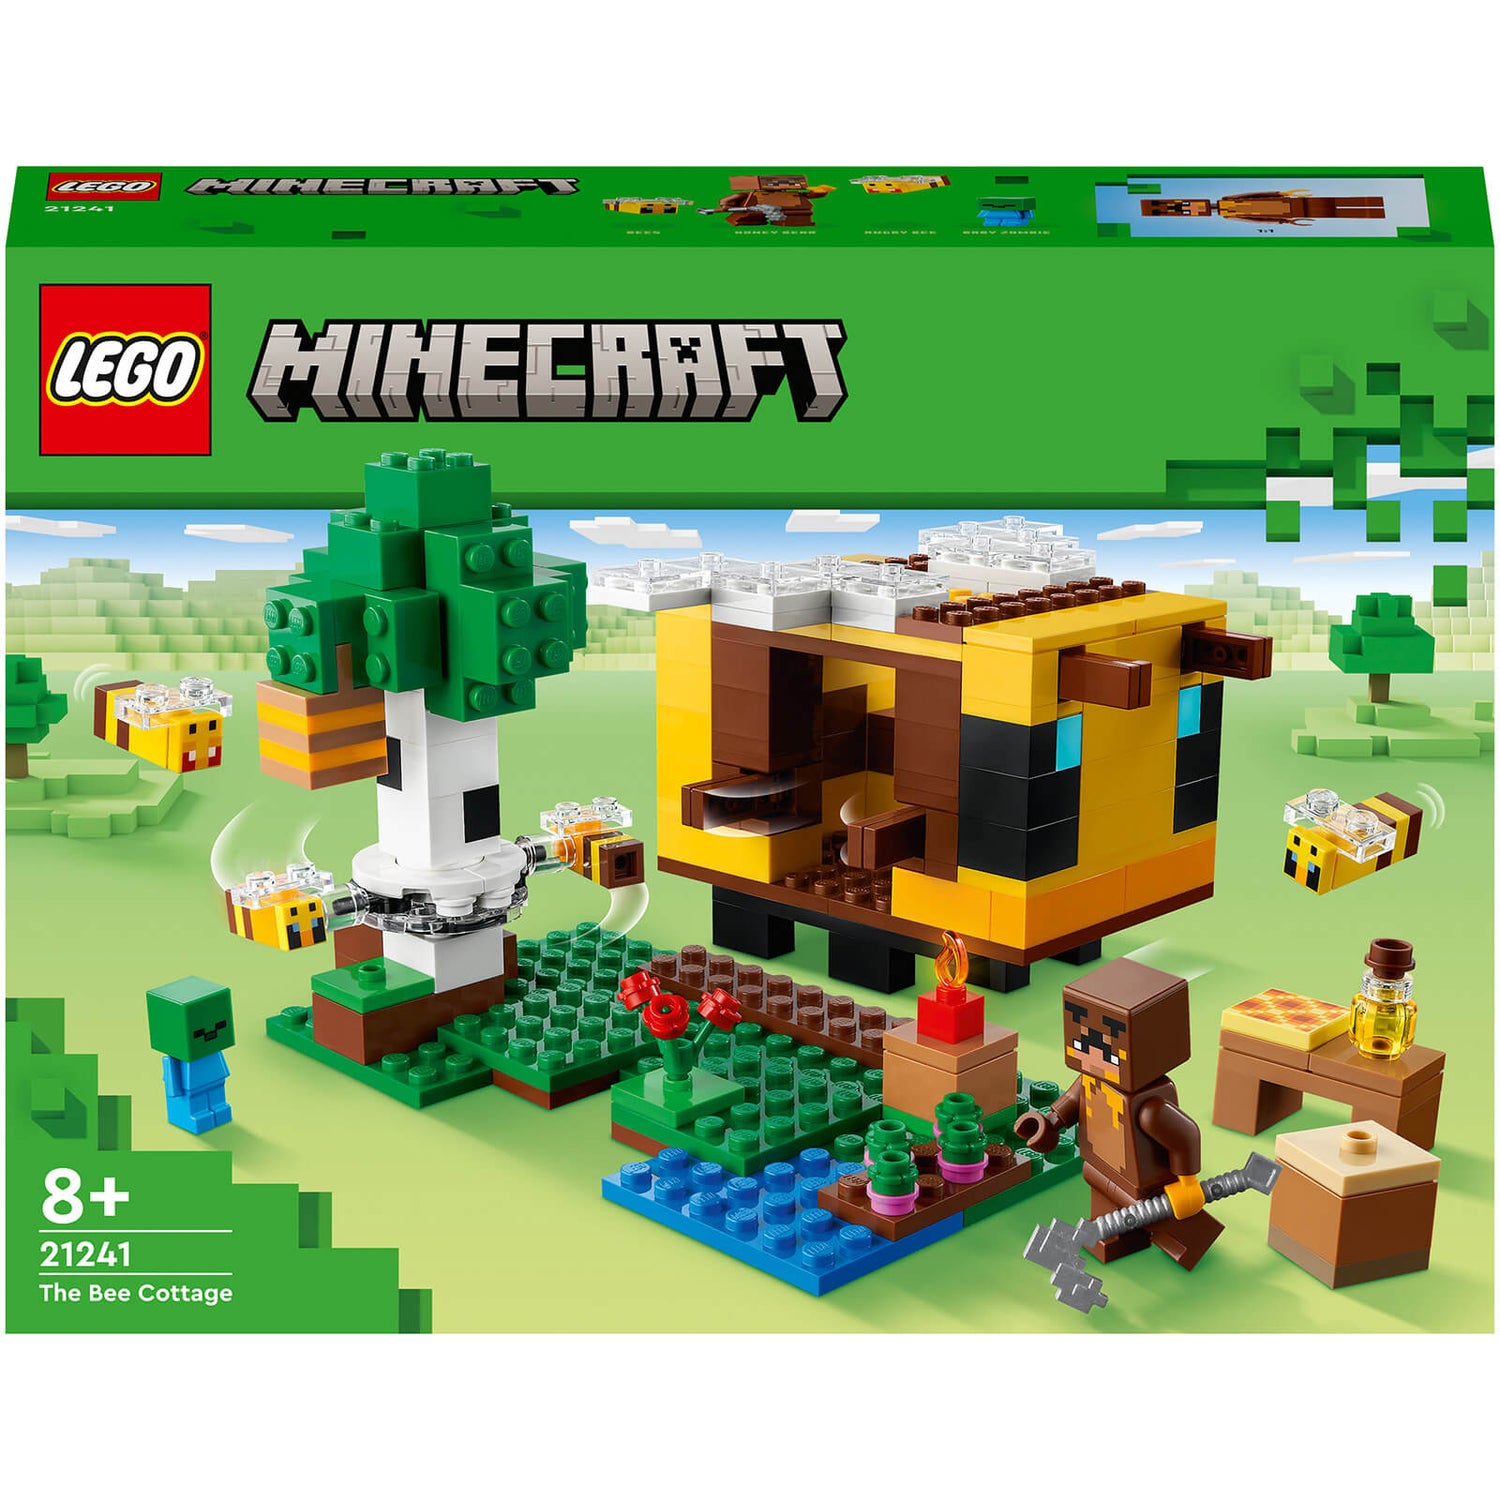 The Bee Cottage! LEGO Minecraft 21241 